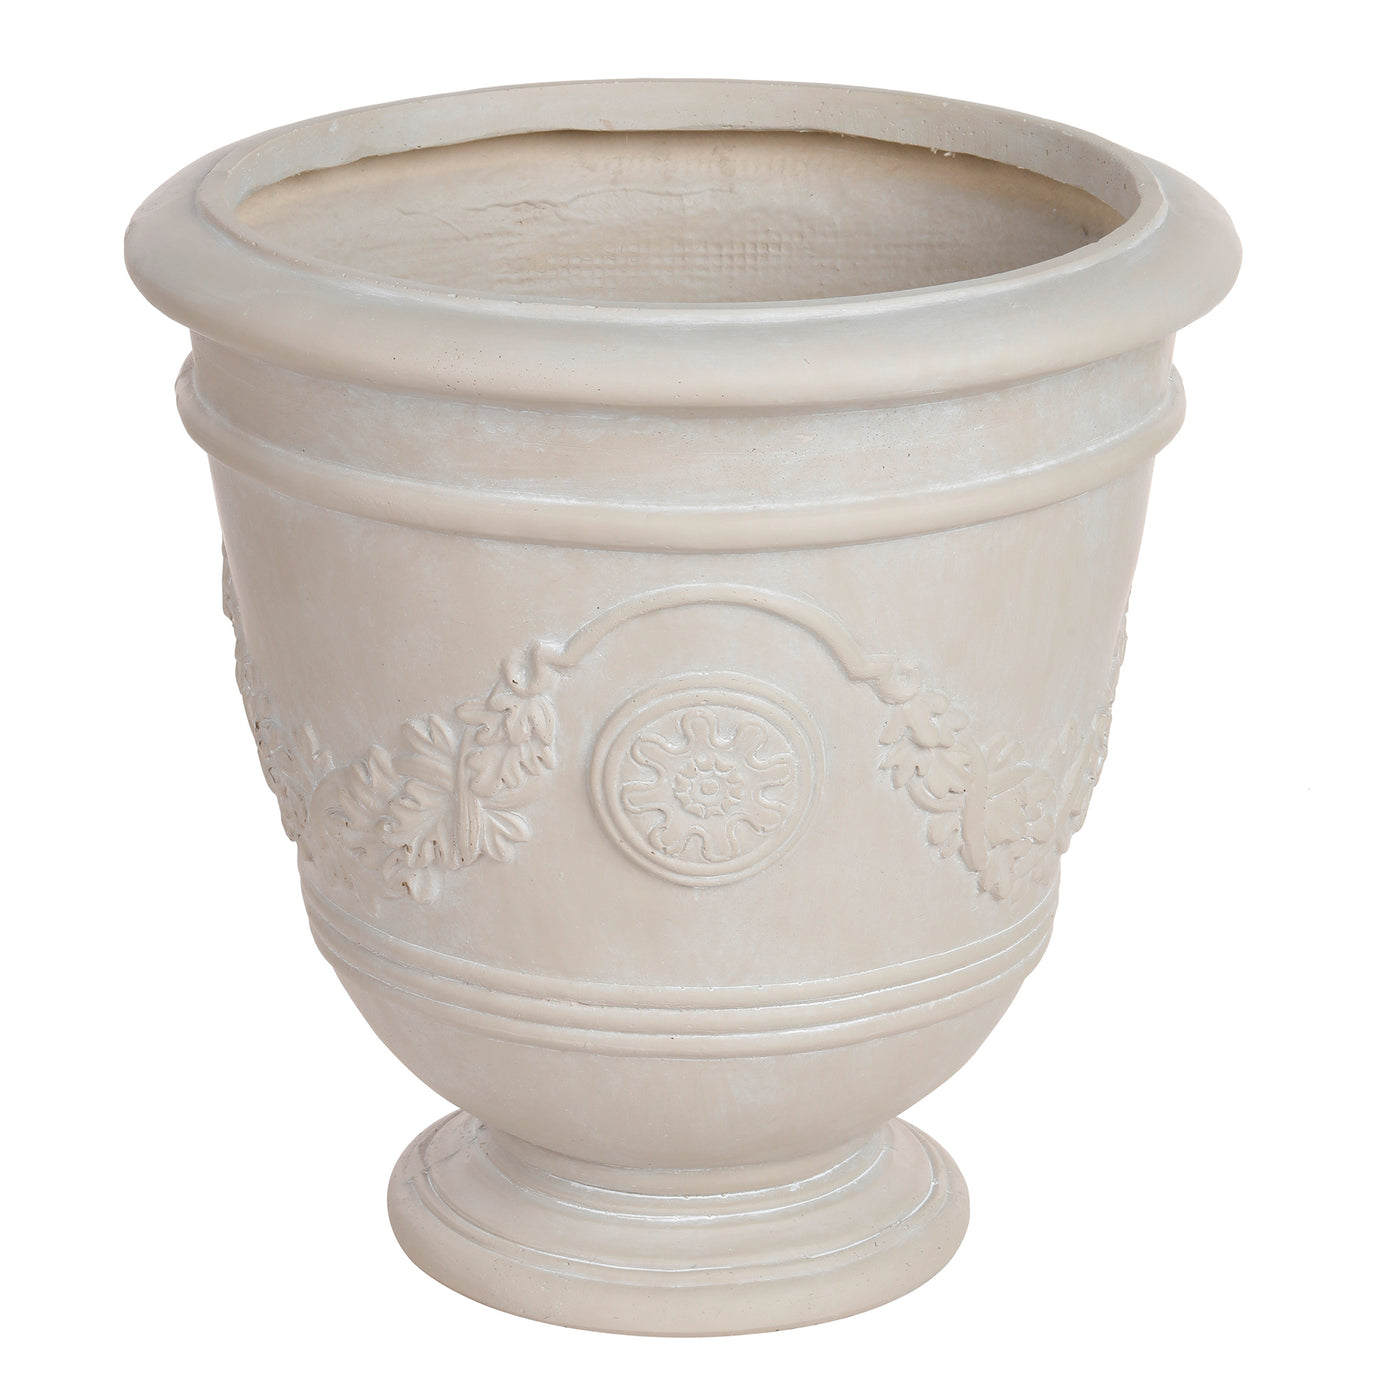 Upscale Tuscan stonecast urn planter in light grey